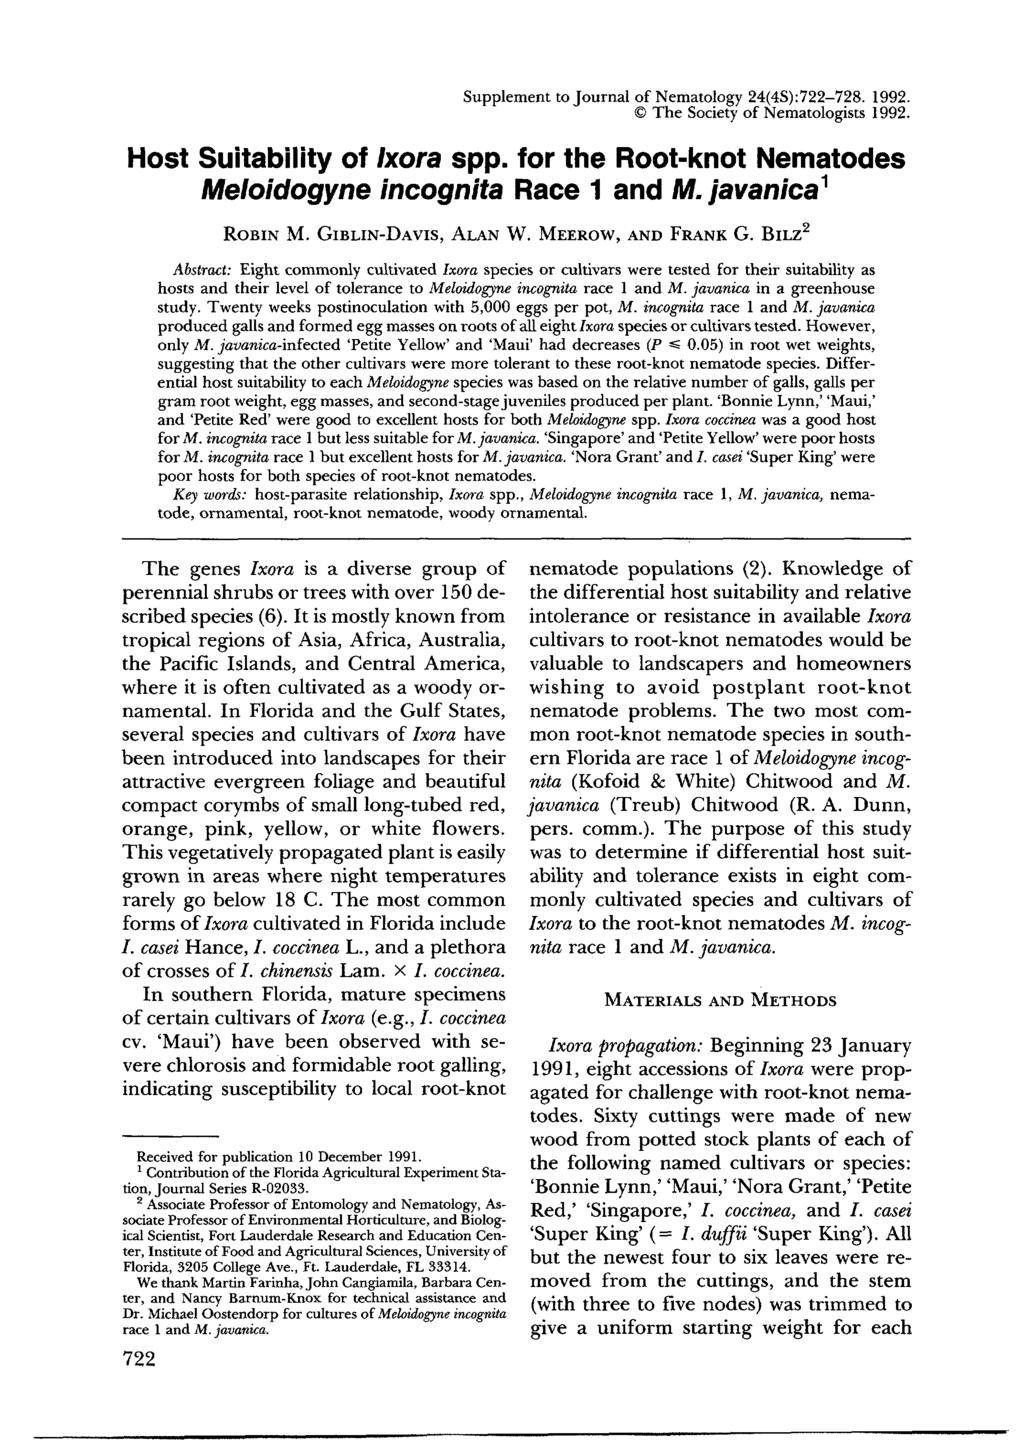 Supplement to Journal of Nematology 24(4S):722-728. 1992. The Society of Nematologists 1992. Host Suitability of Ixora spp. for the Root-knot Nematodes Meloidogyne incognita Race 1 and M.